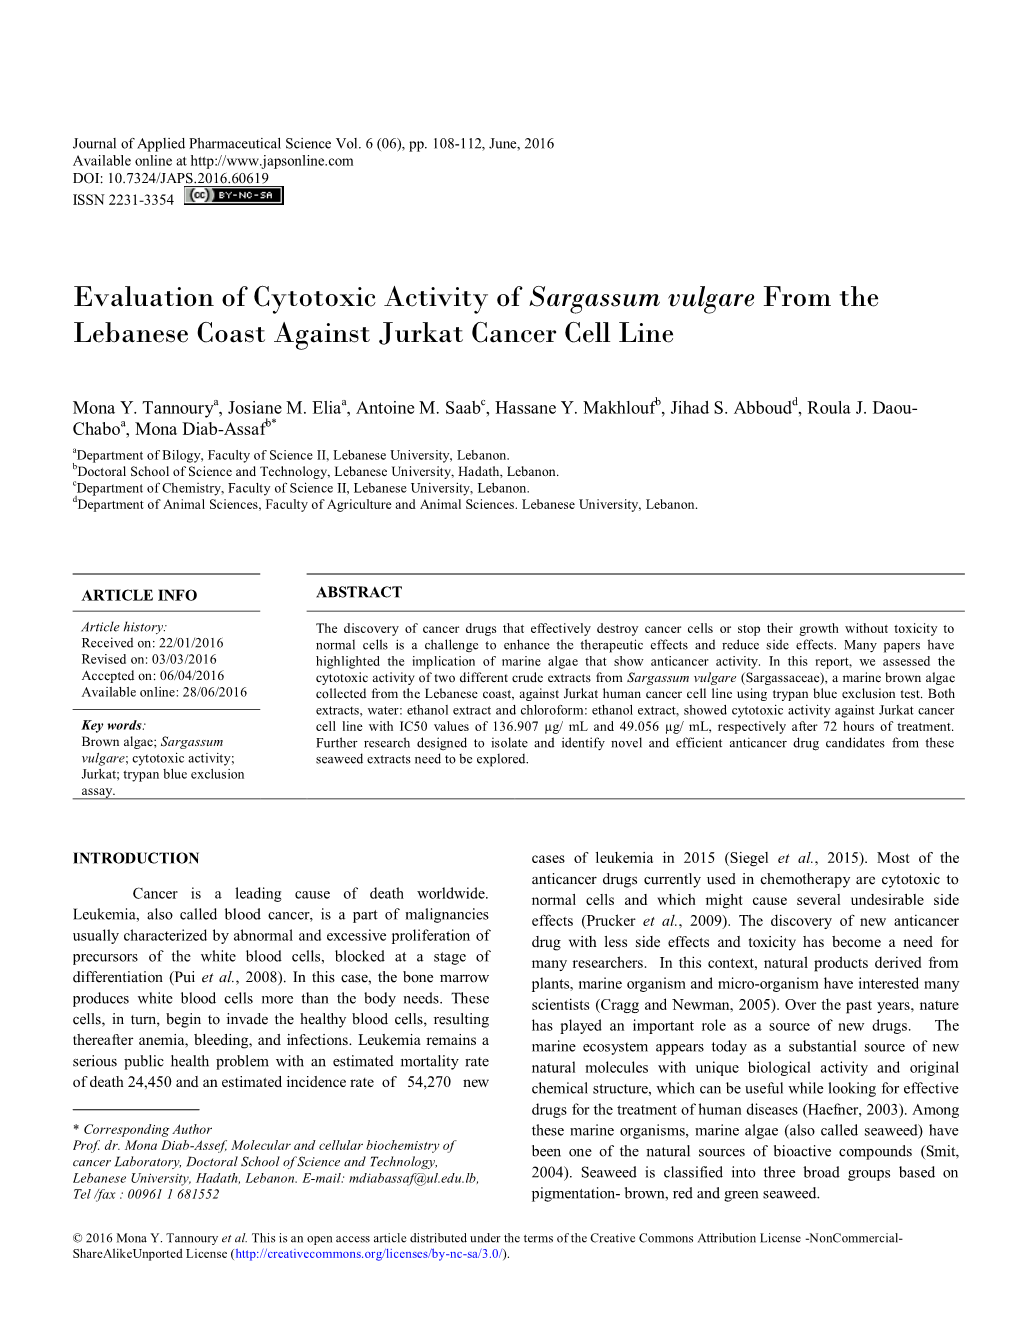 Evaluation of Cytotoxic Activity of Sargassum Vulgare from the Lebanese Coast Against Jurkat Cancer Cell Line